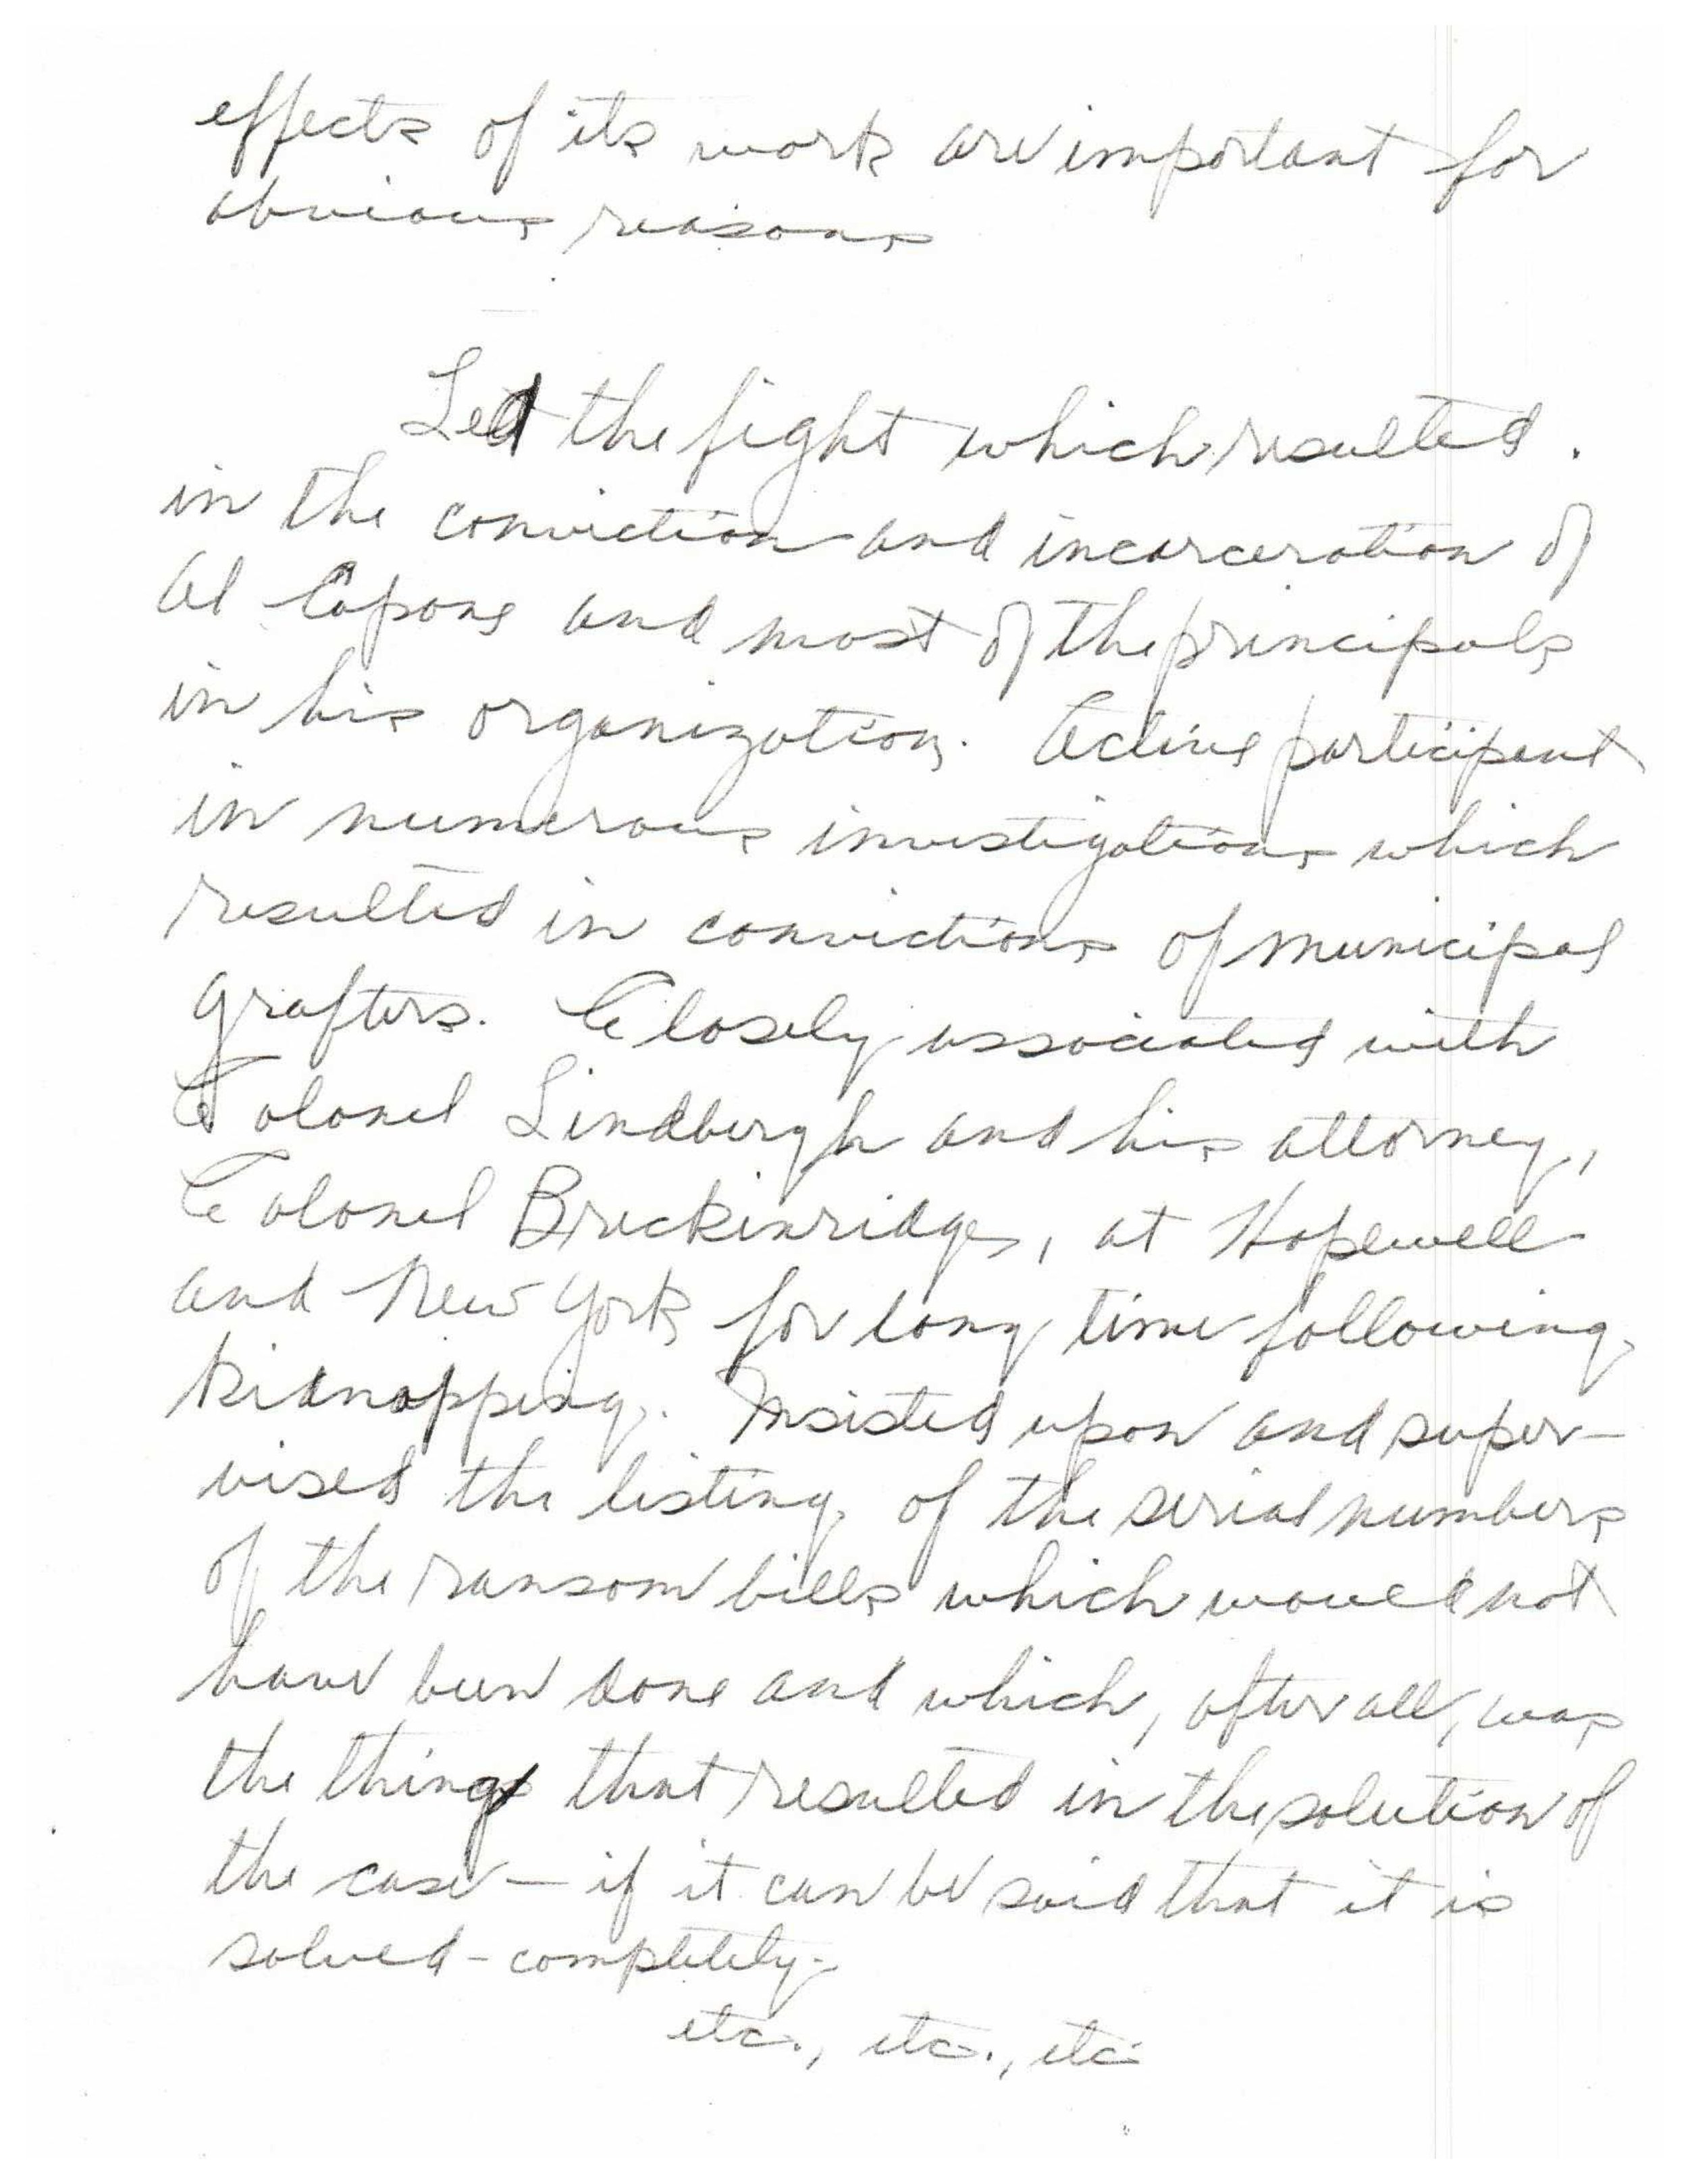 Lindy-Handwritten page 4 note  Case closed?.jpg